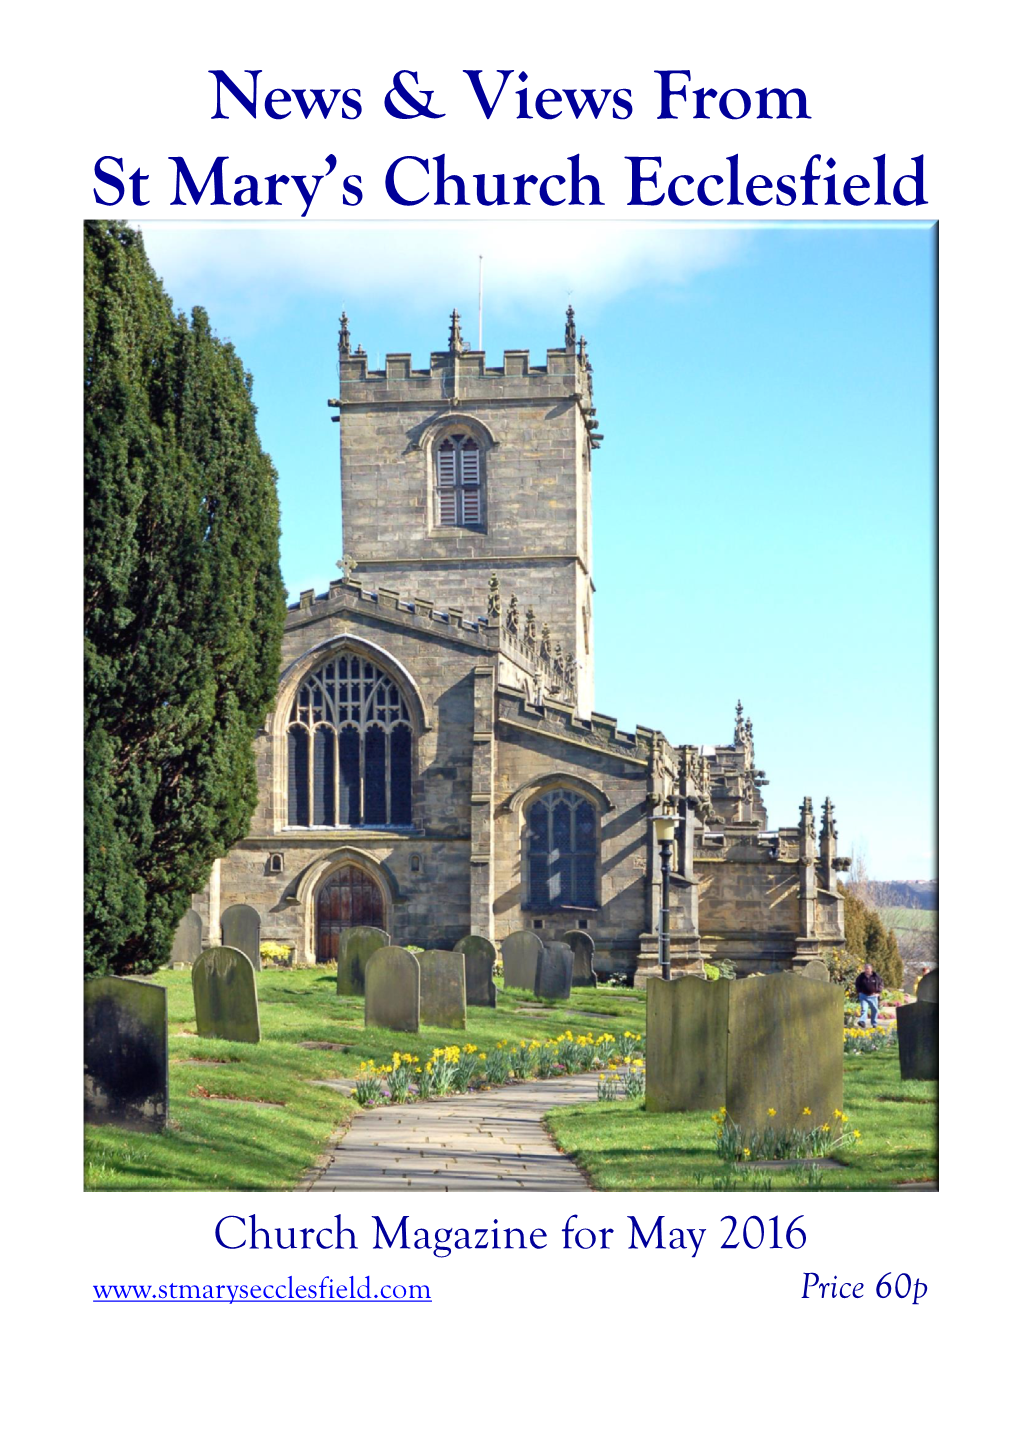 News & Views from St Mary's Church Ecclesfield